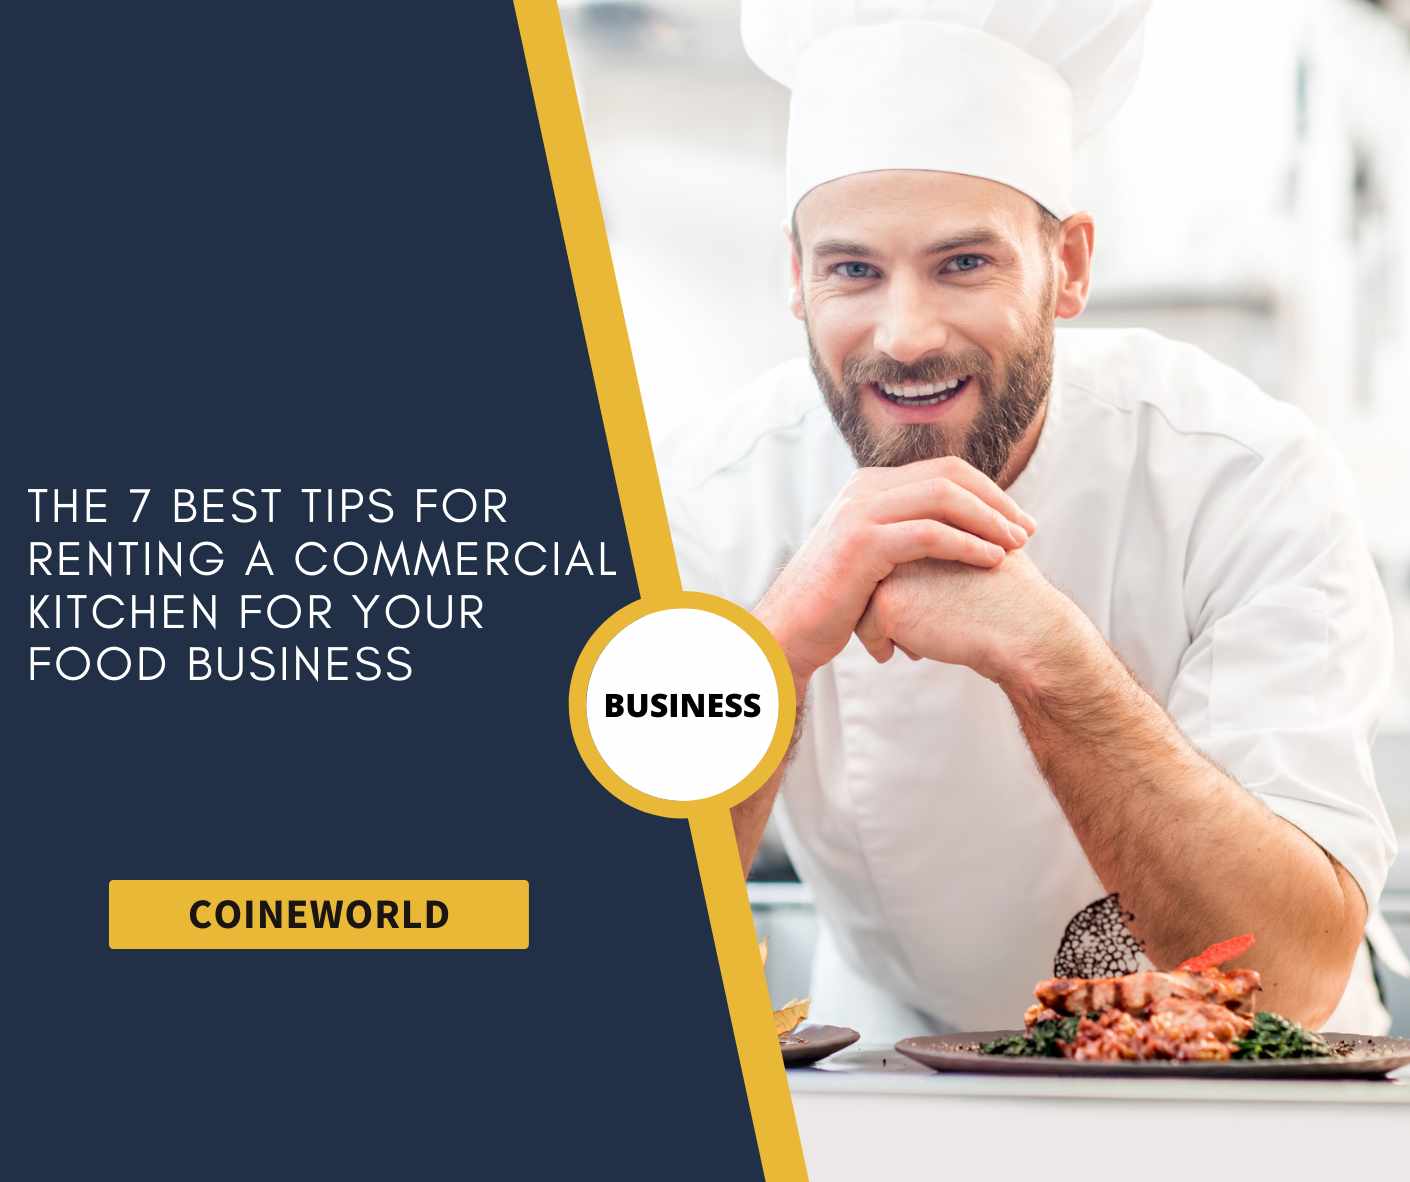 The 7 Best Tips For Renting a Commercial Kitchen For Your Food Business